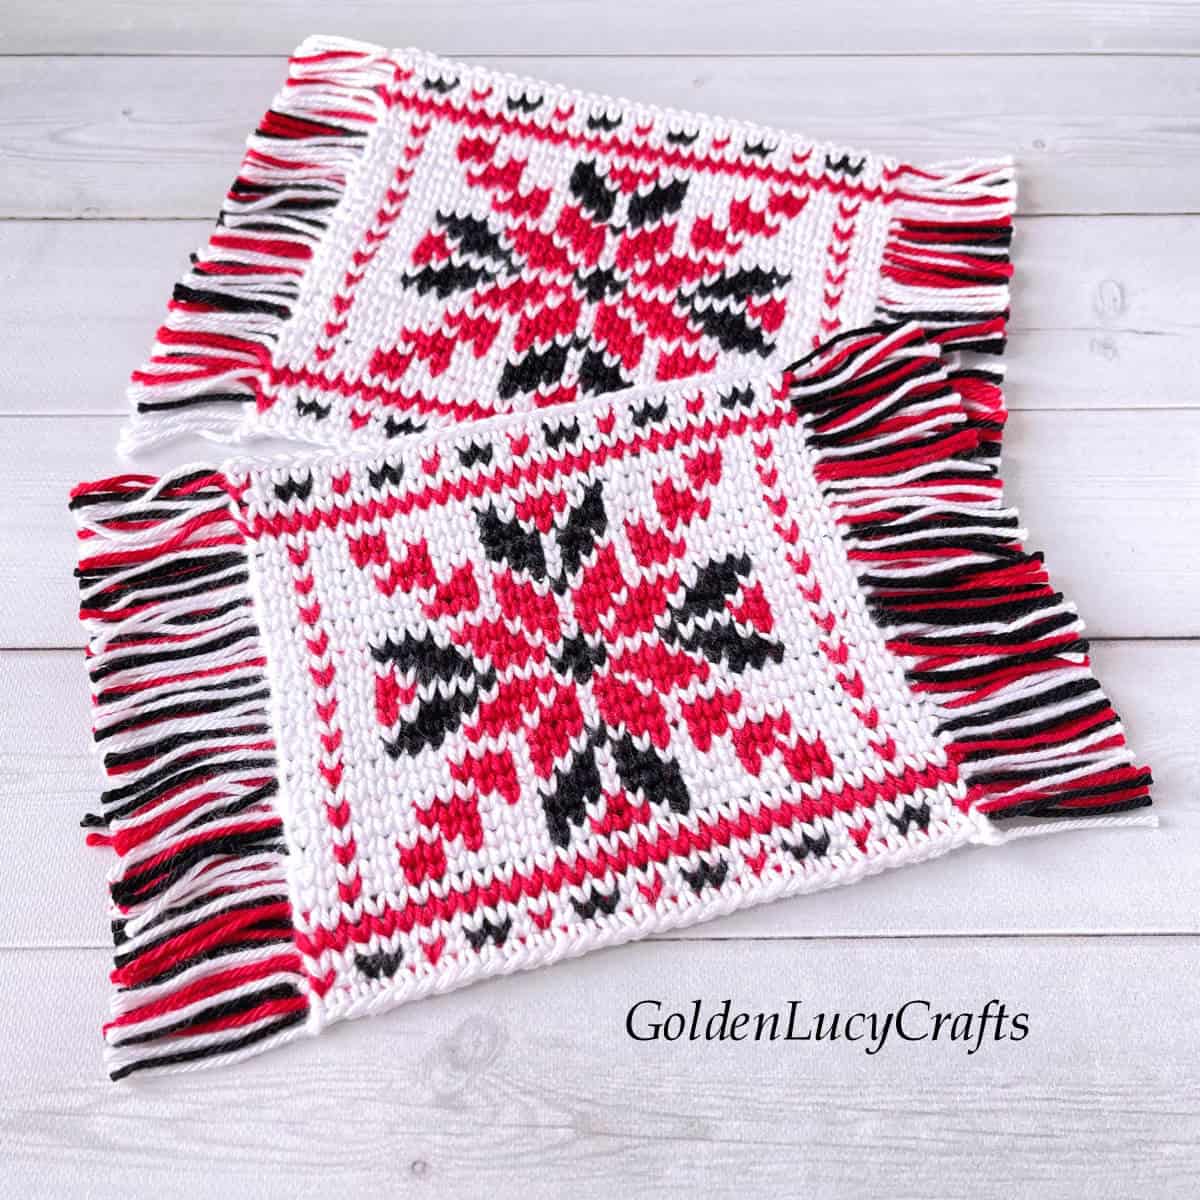 Two crocheted coasters in red, black and white colors.